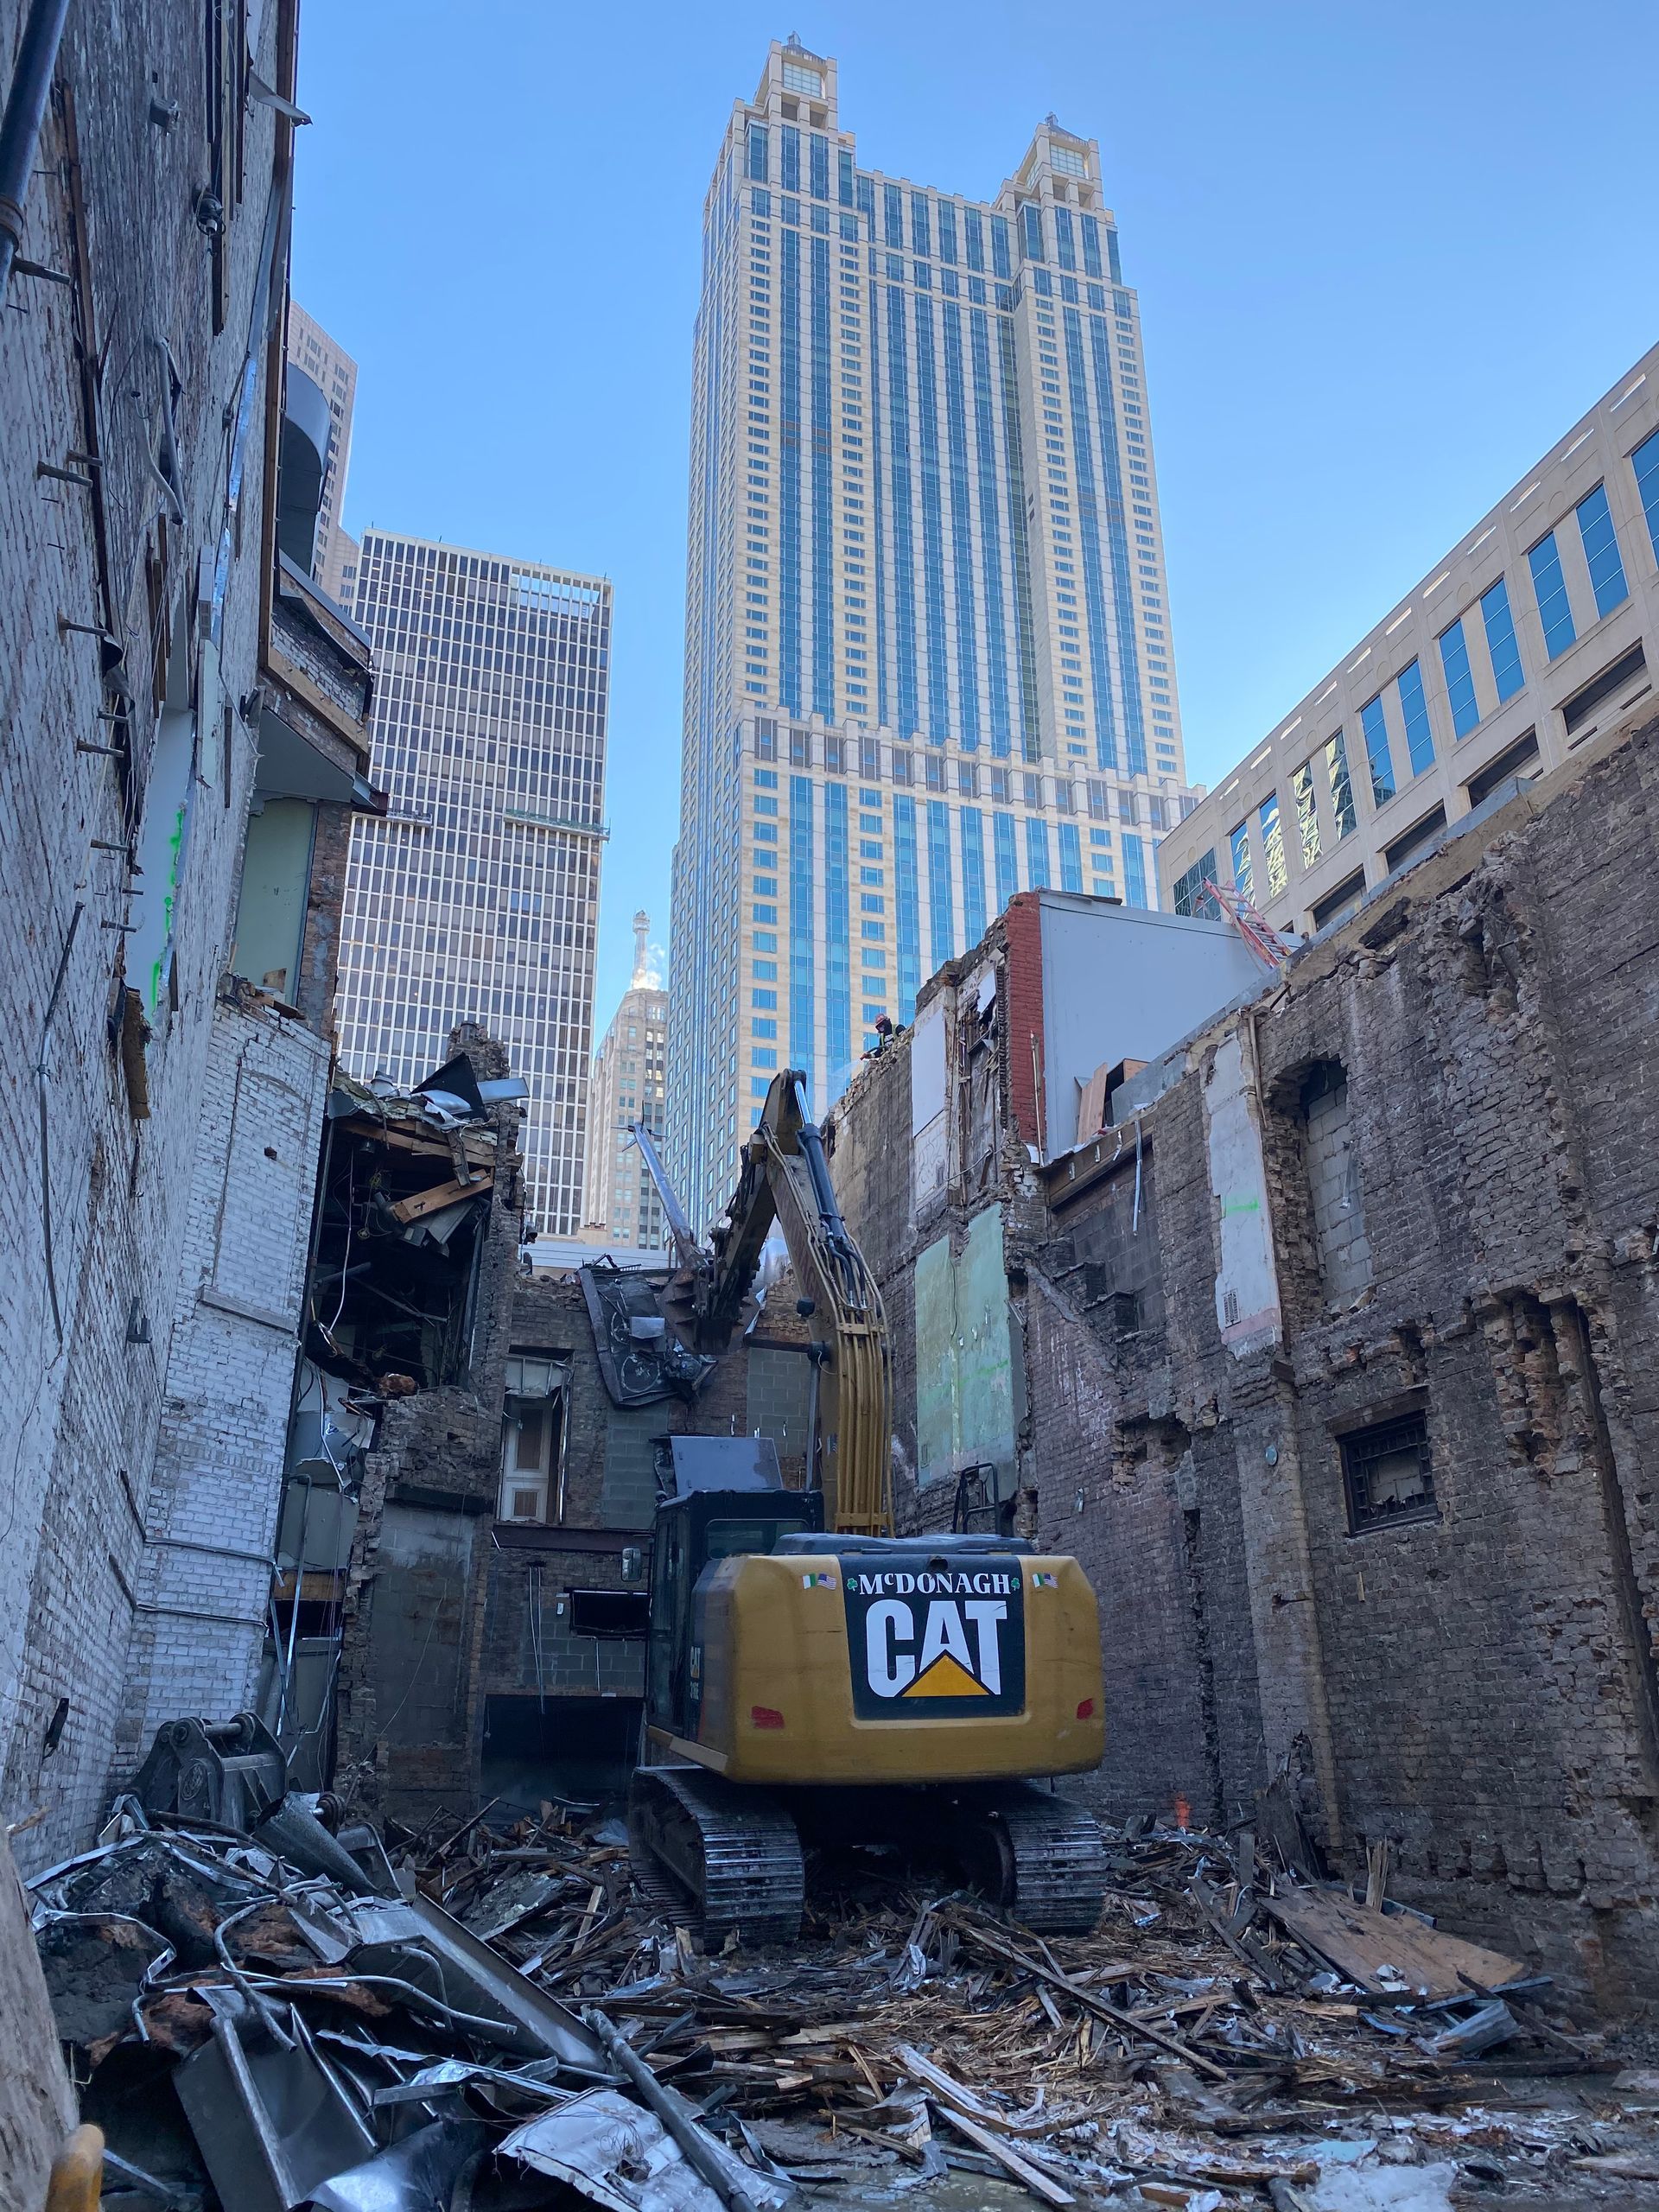 A cat excavator is destroying a building in a city.